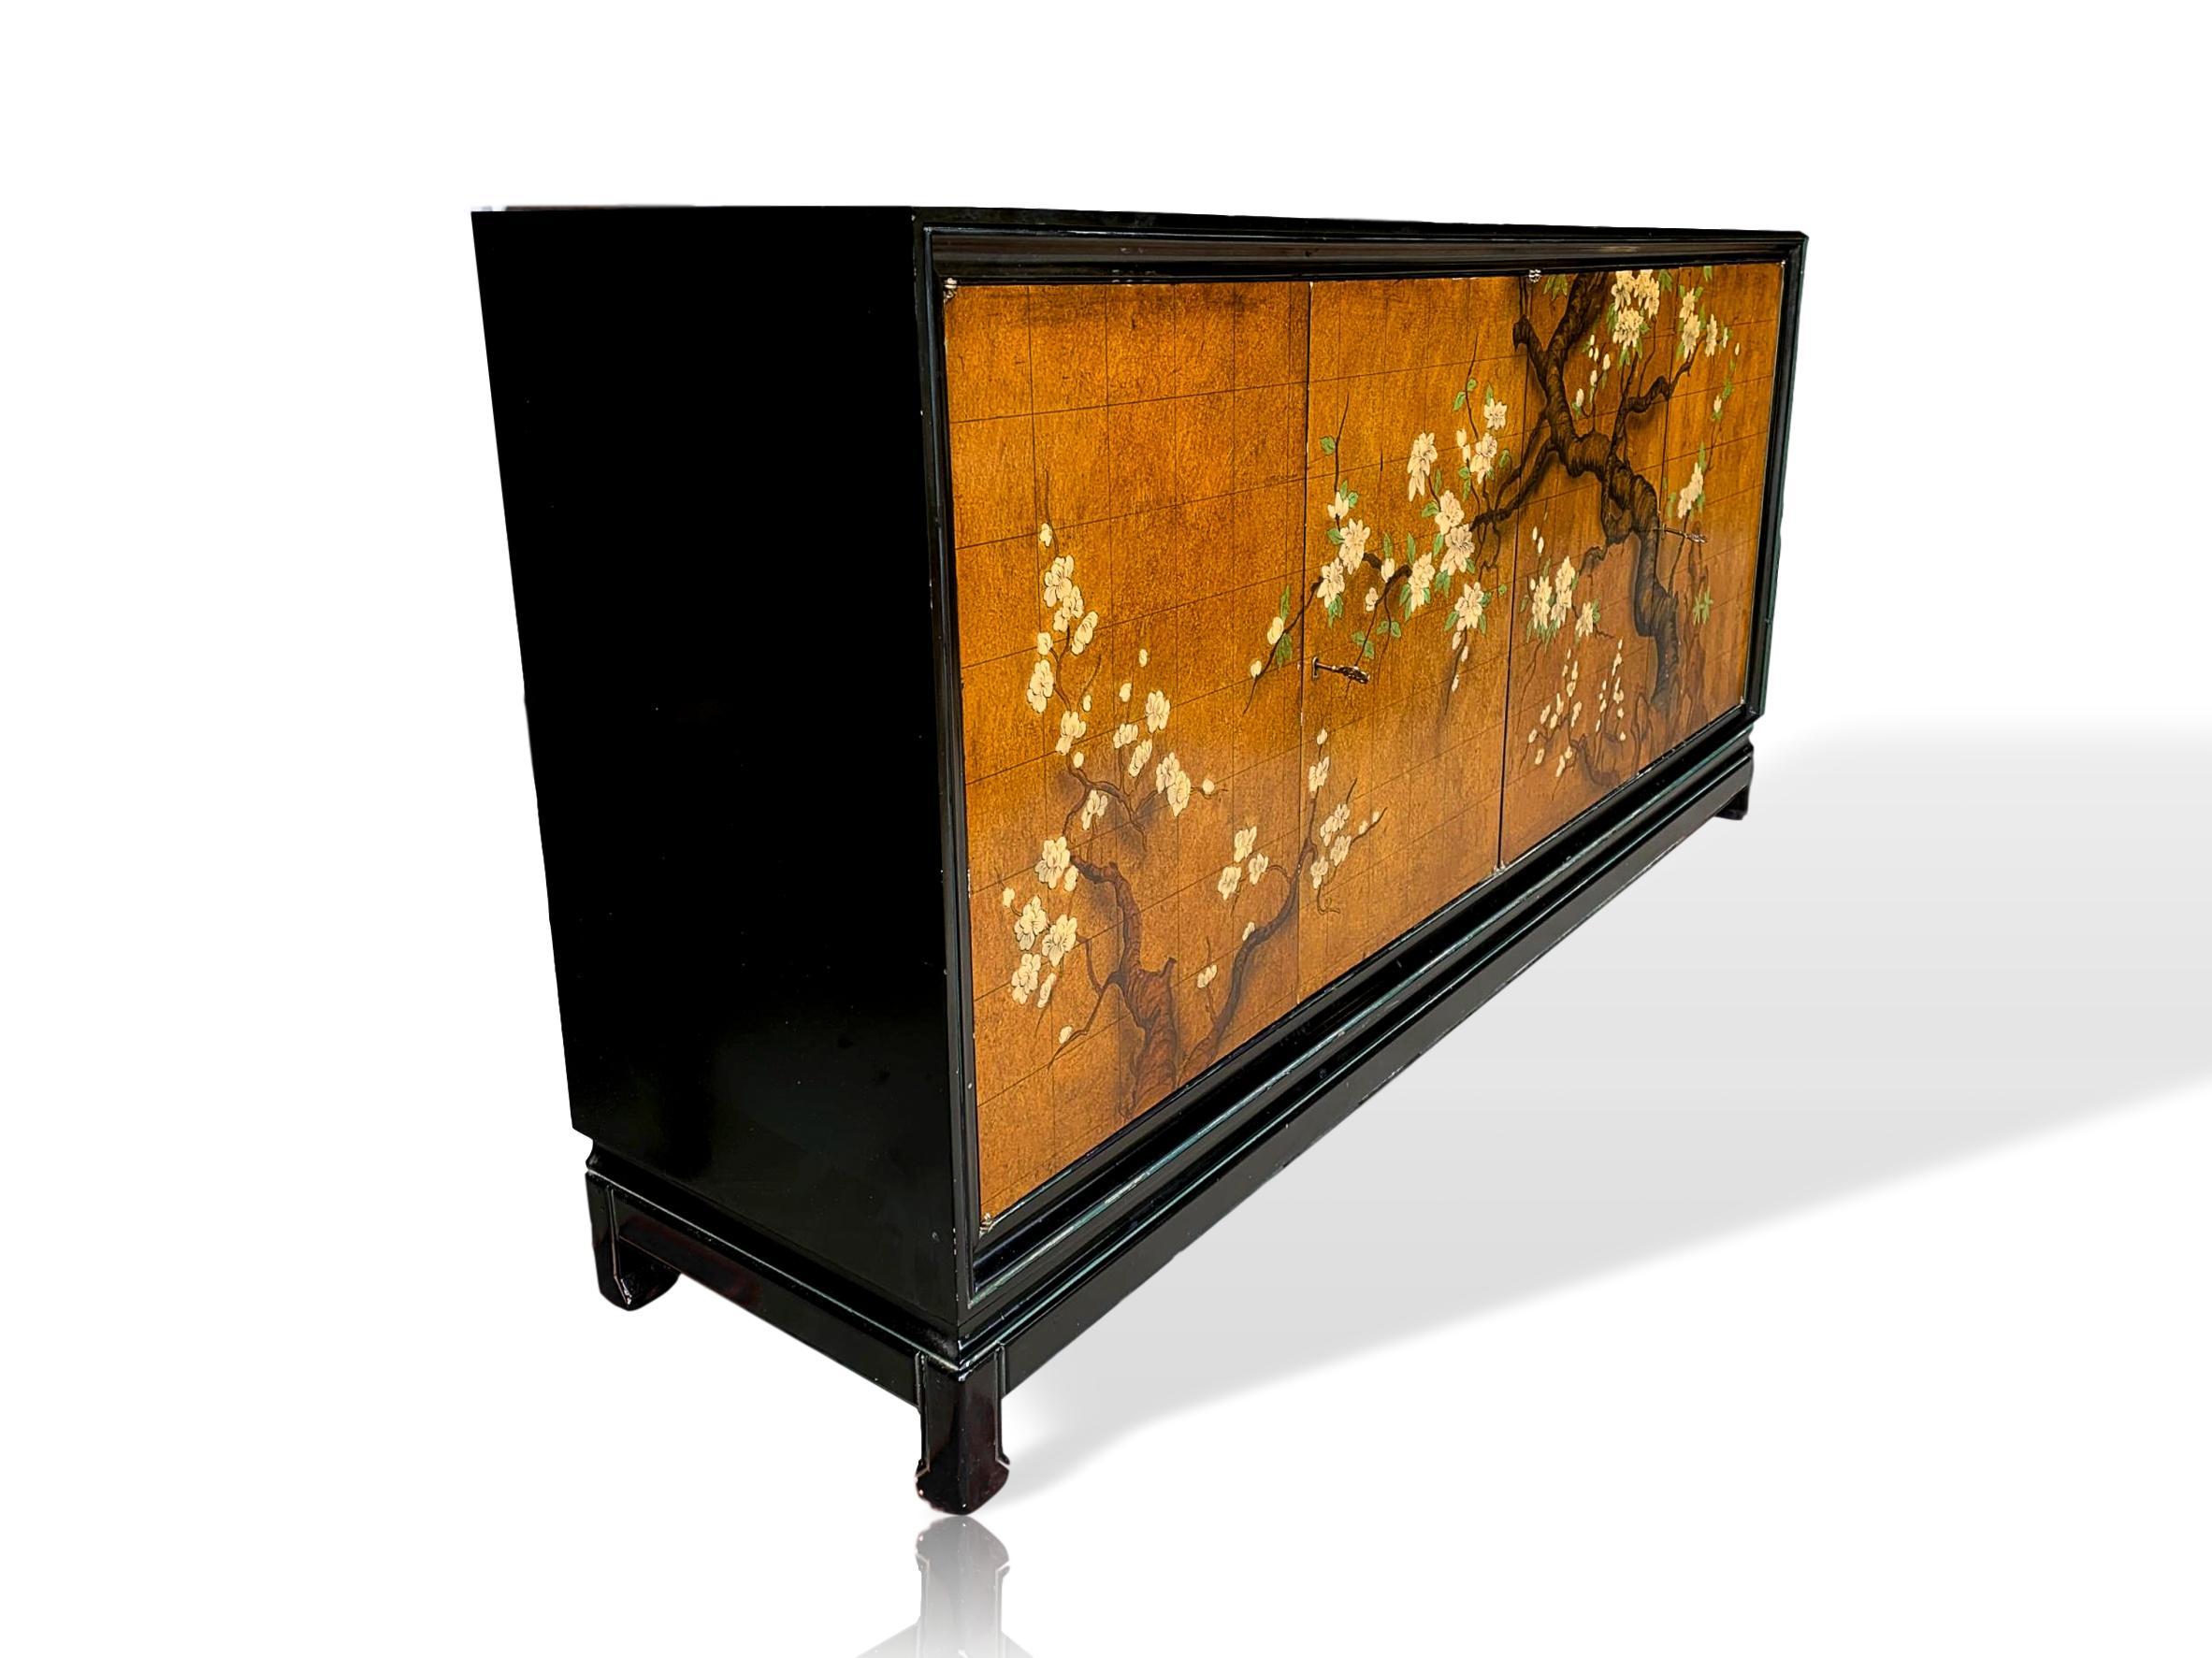 Mid-Century Modern black lacquered chinoiserie credenza, Italian, circa 1960, the interior fitted for stemware and storage.
In excellent vintage condition, without any serious blemishes, with minimal, very slight swirl 